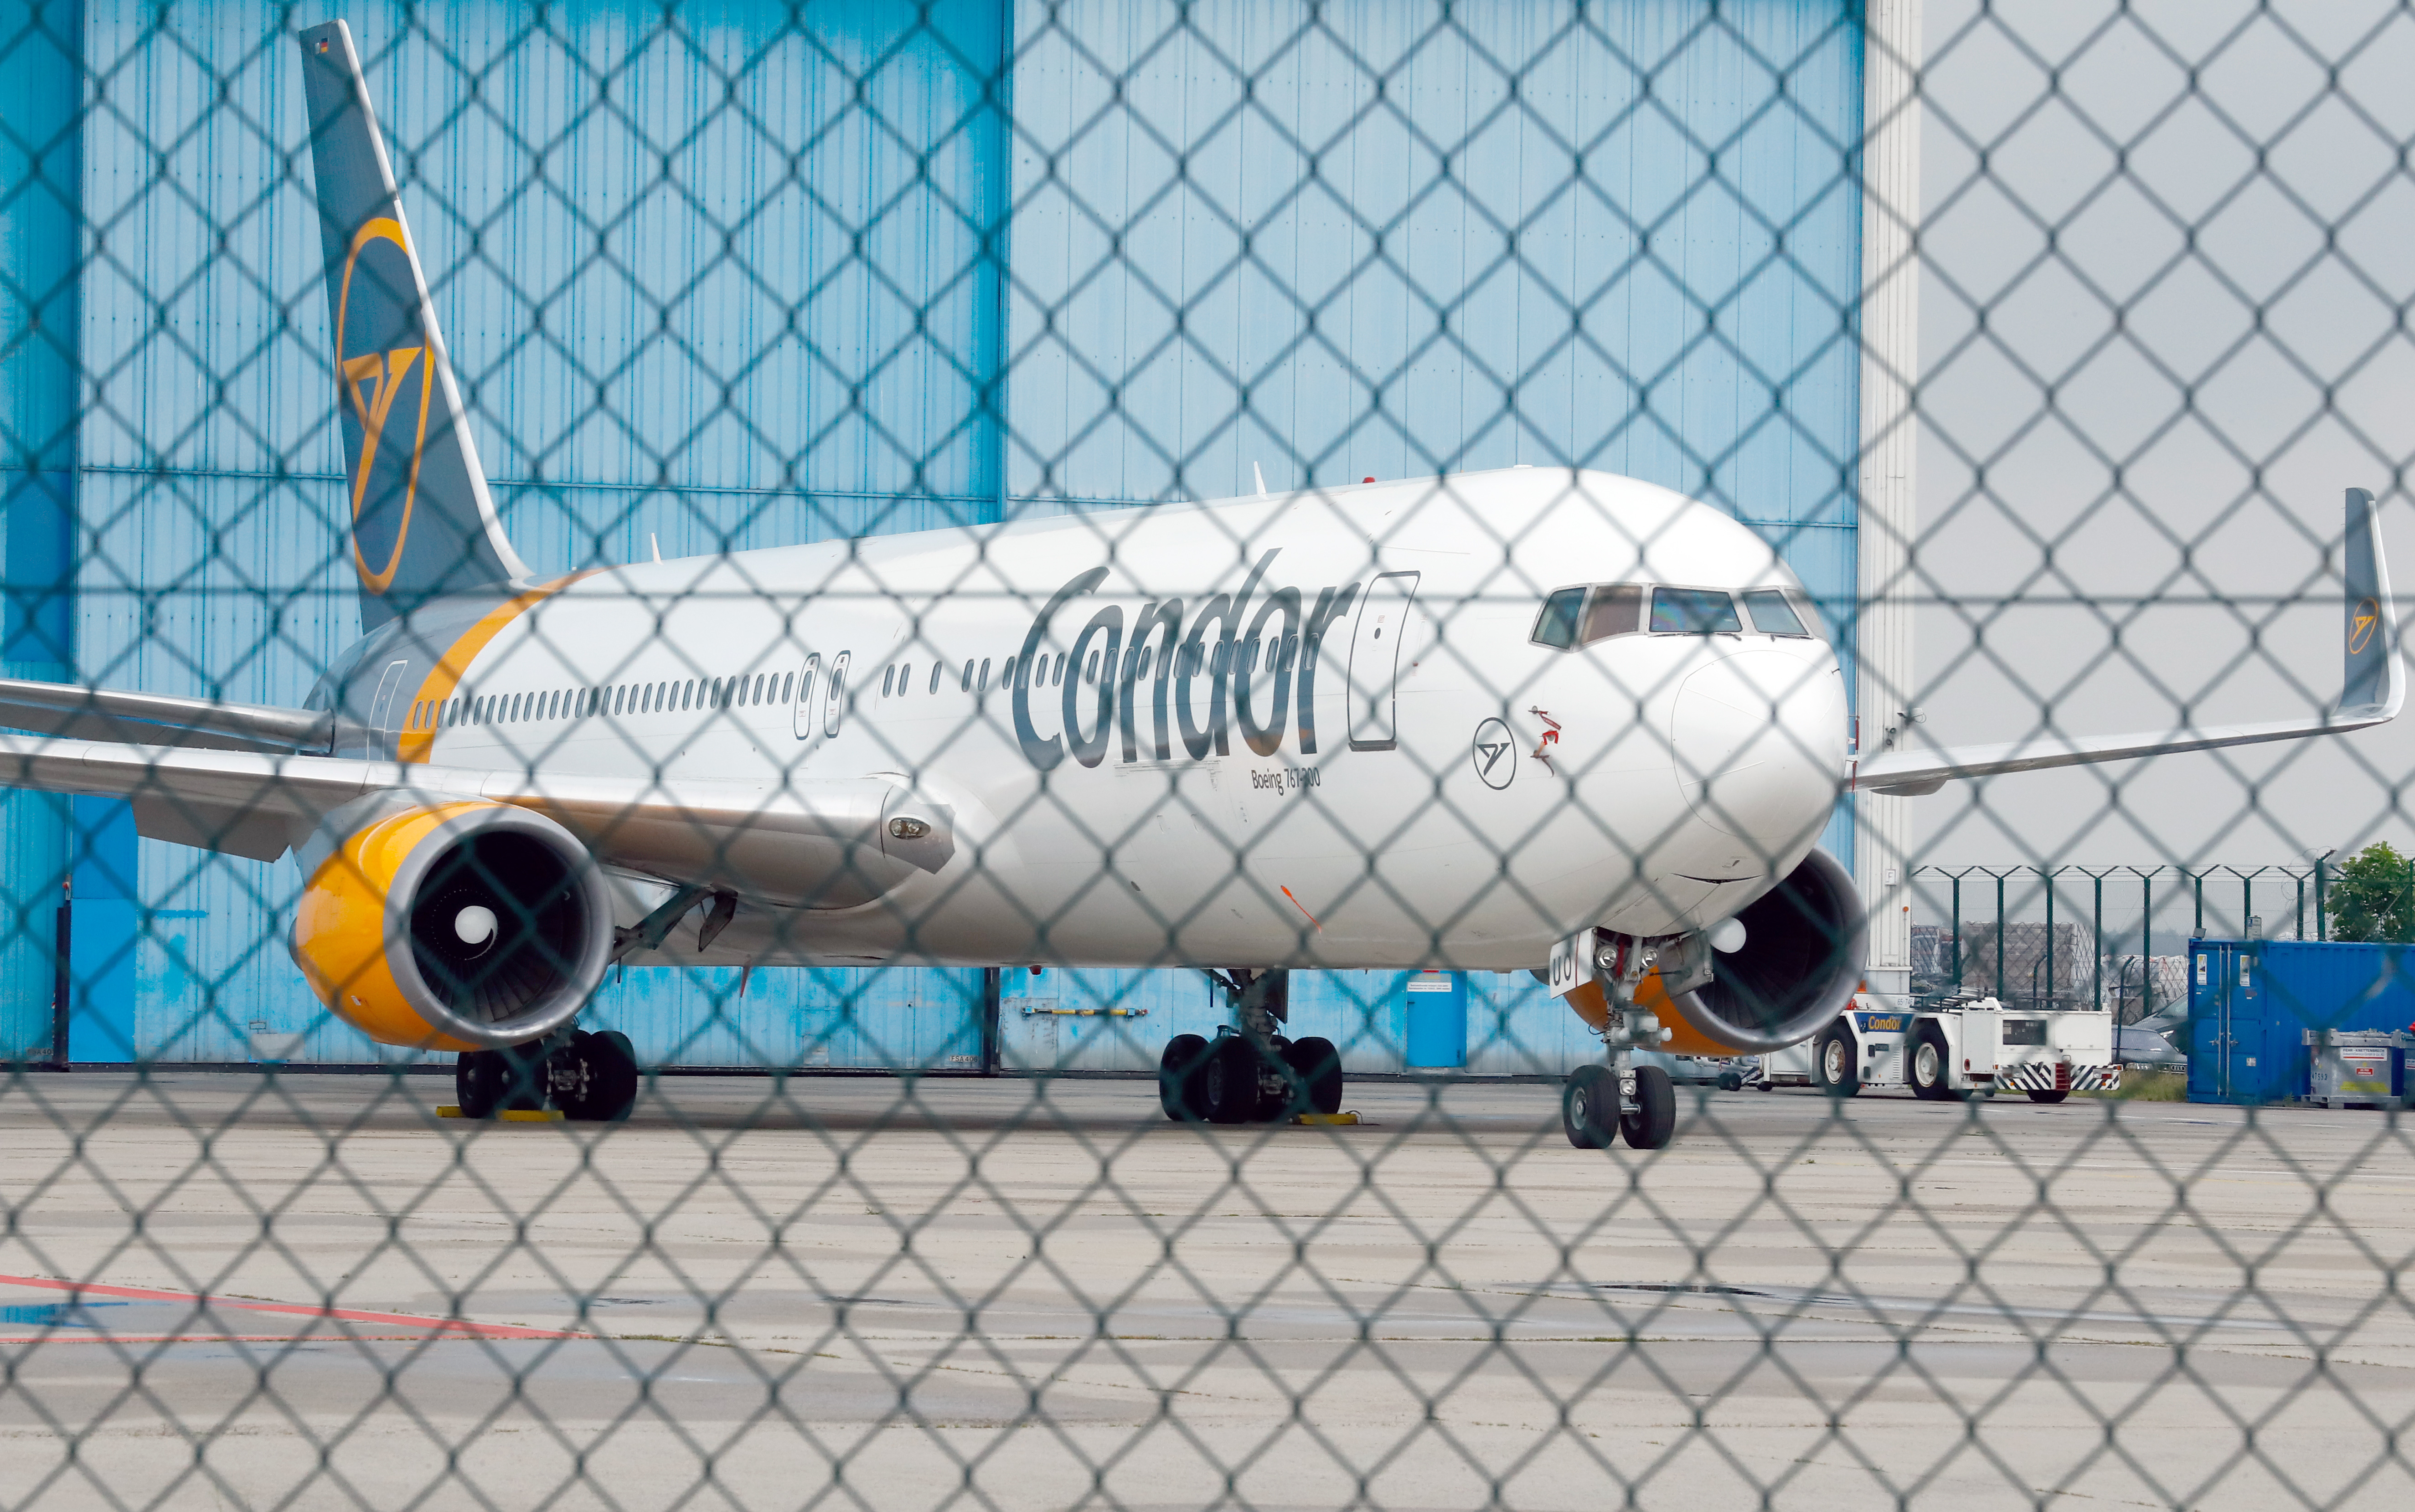 Lufthansa budges in flight tussle with Condor